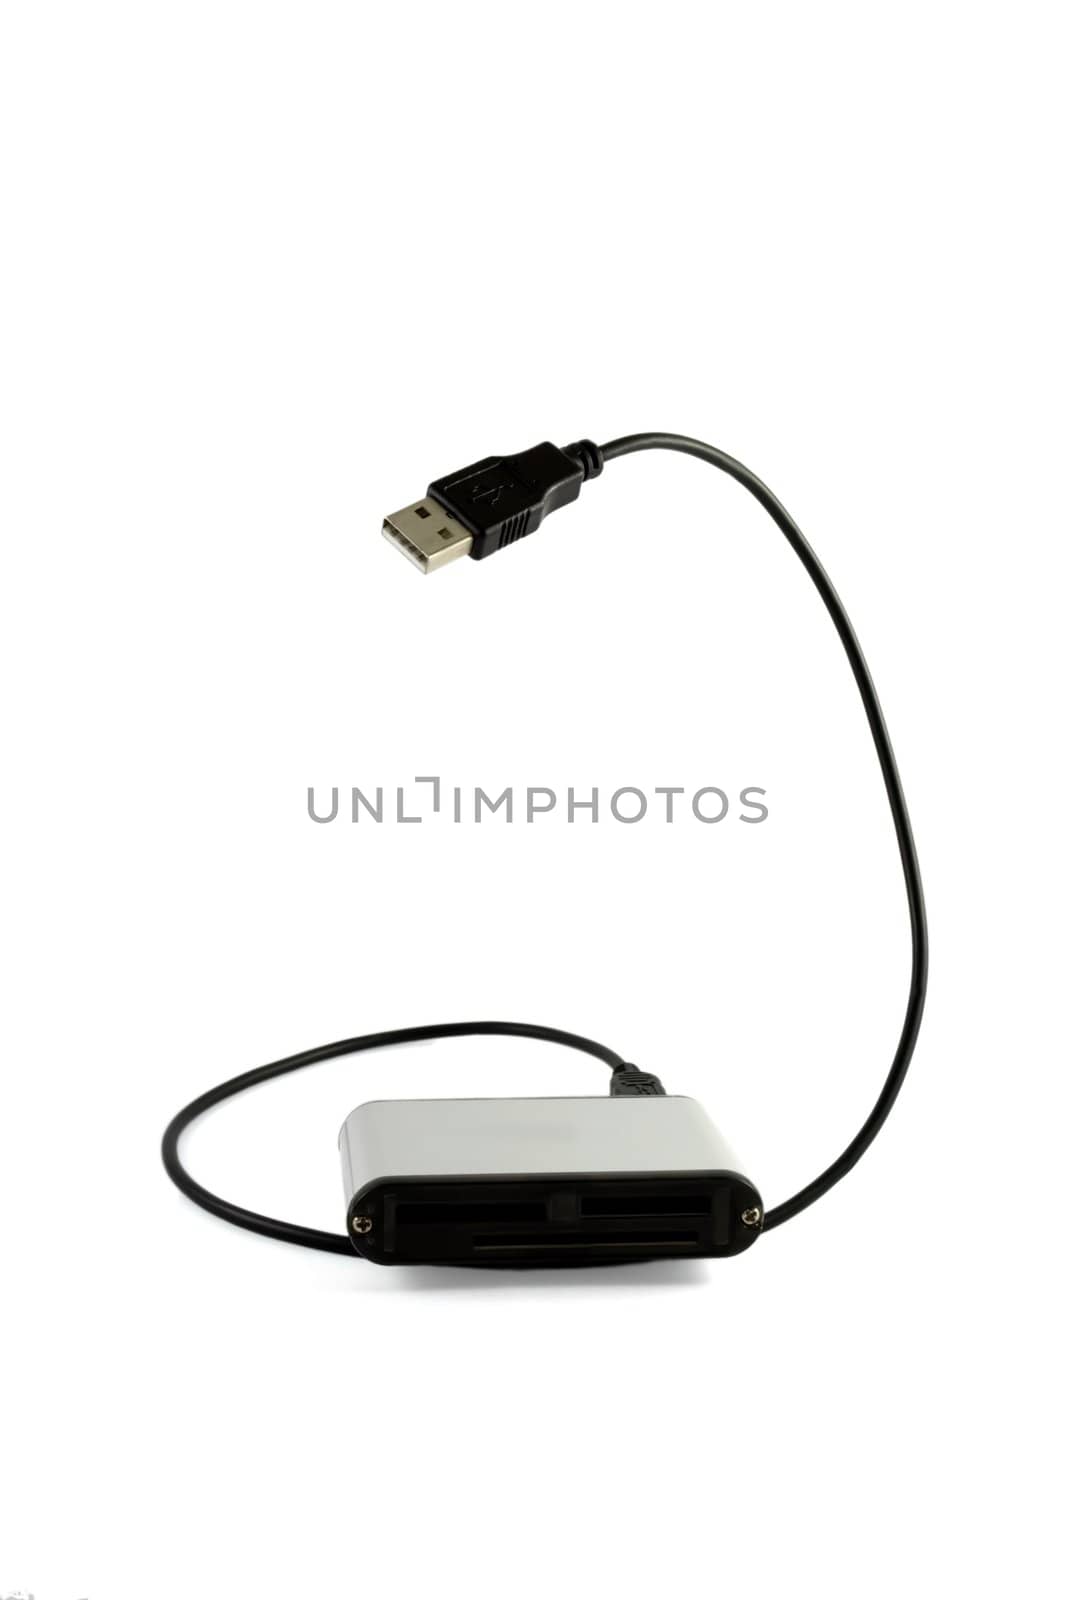 Universal USB card reader ,isolated on white background.